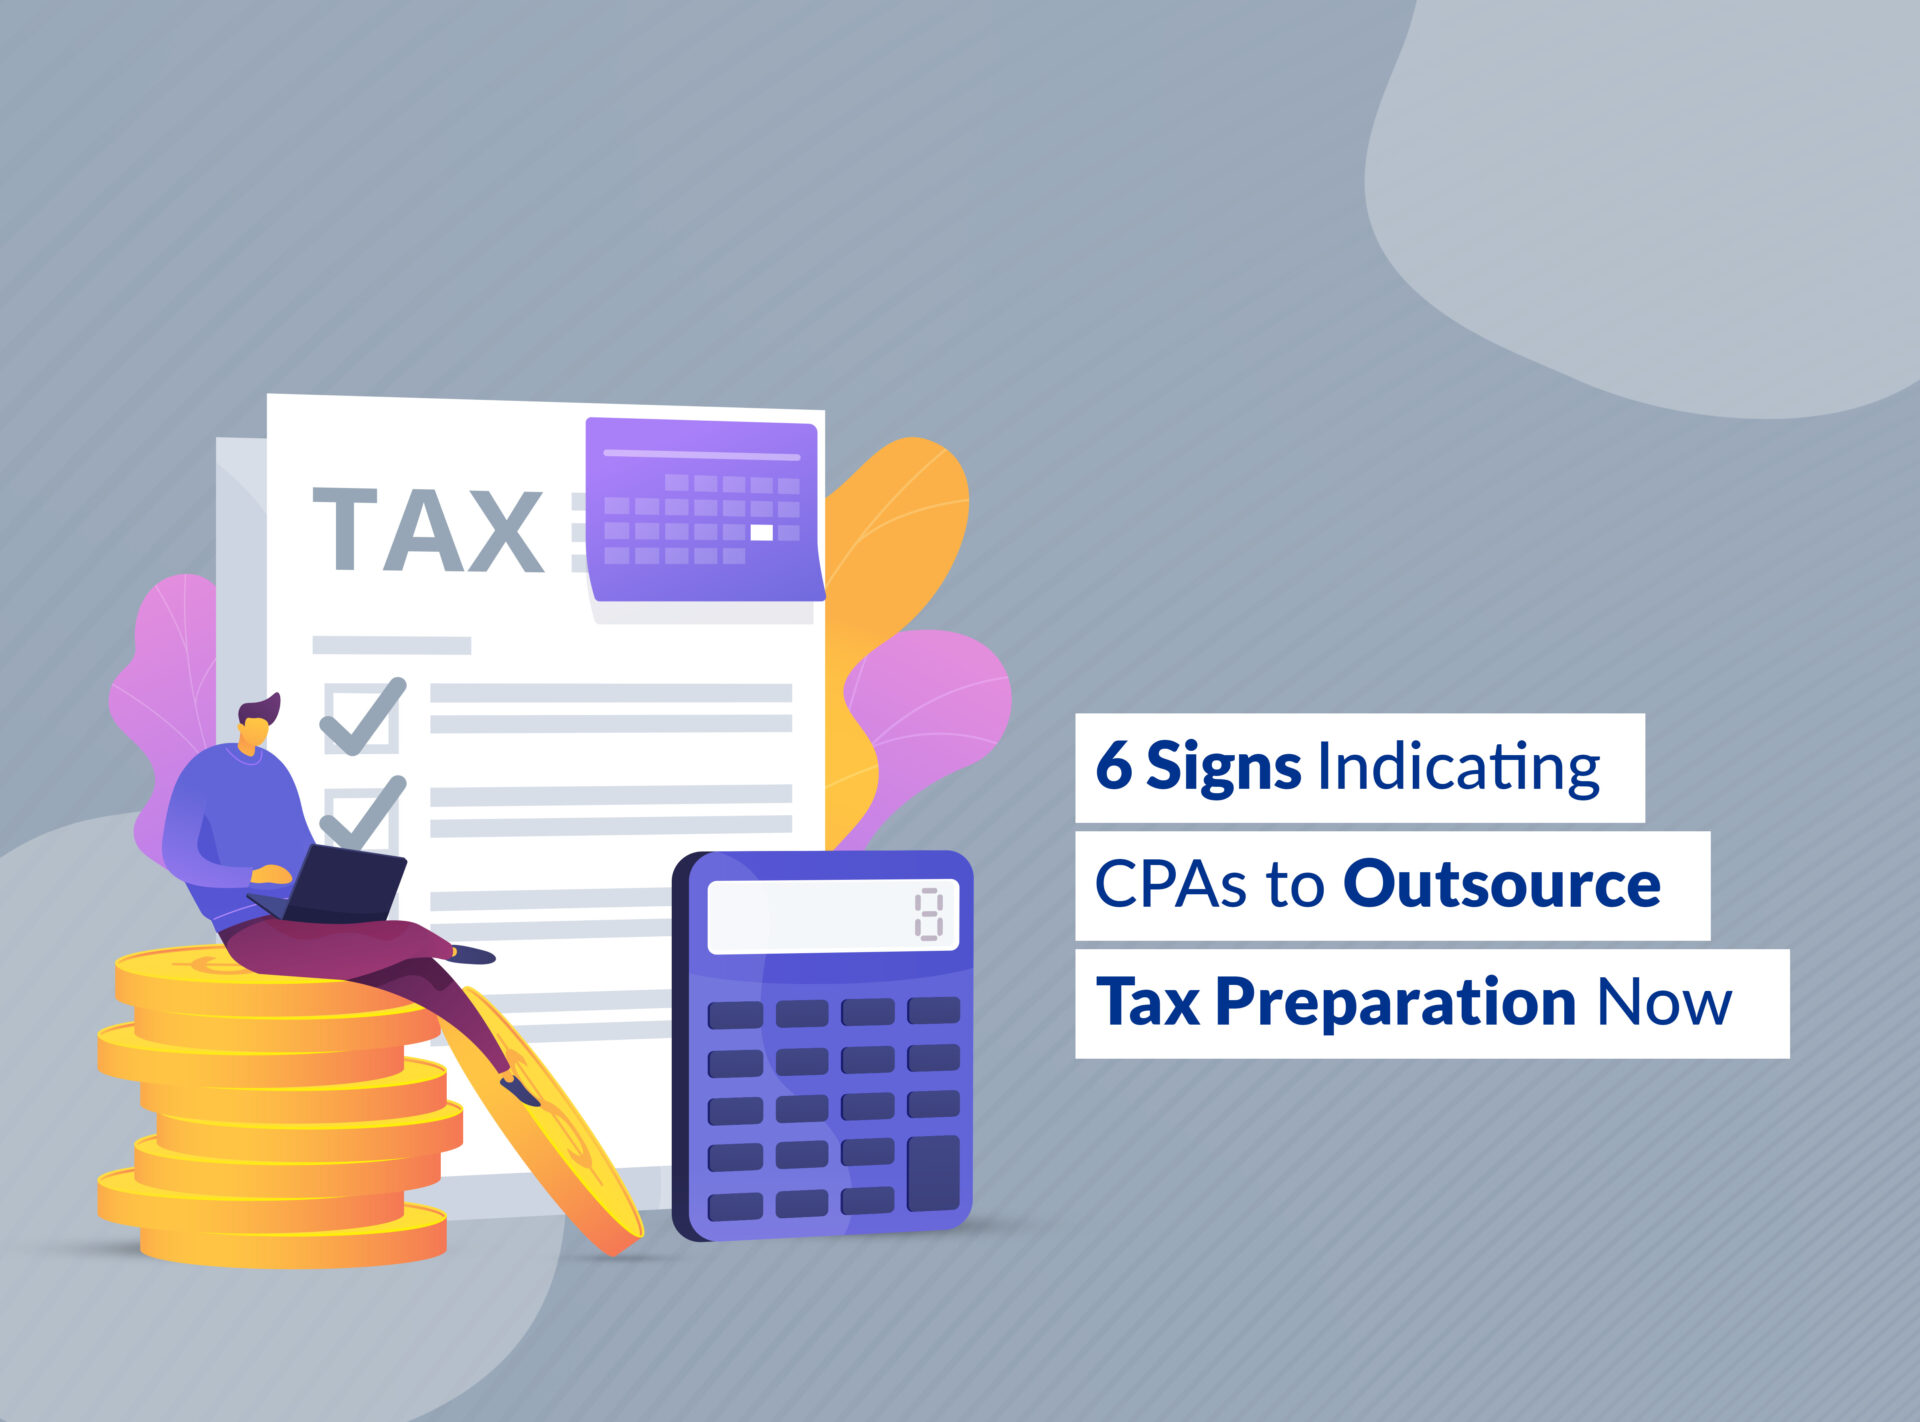 6-Signs-Indicating-CPAs-to-Outsource-Tax-Preparation-Now